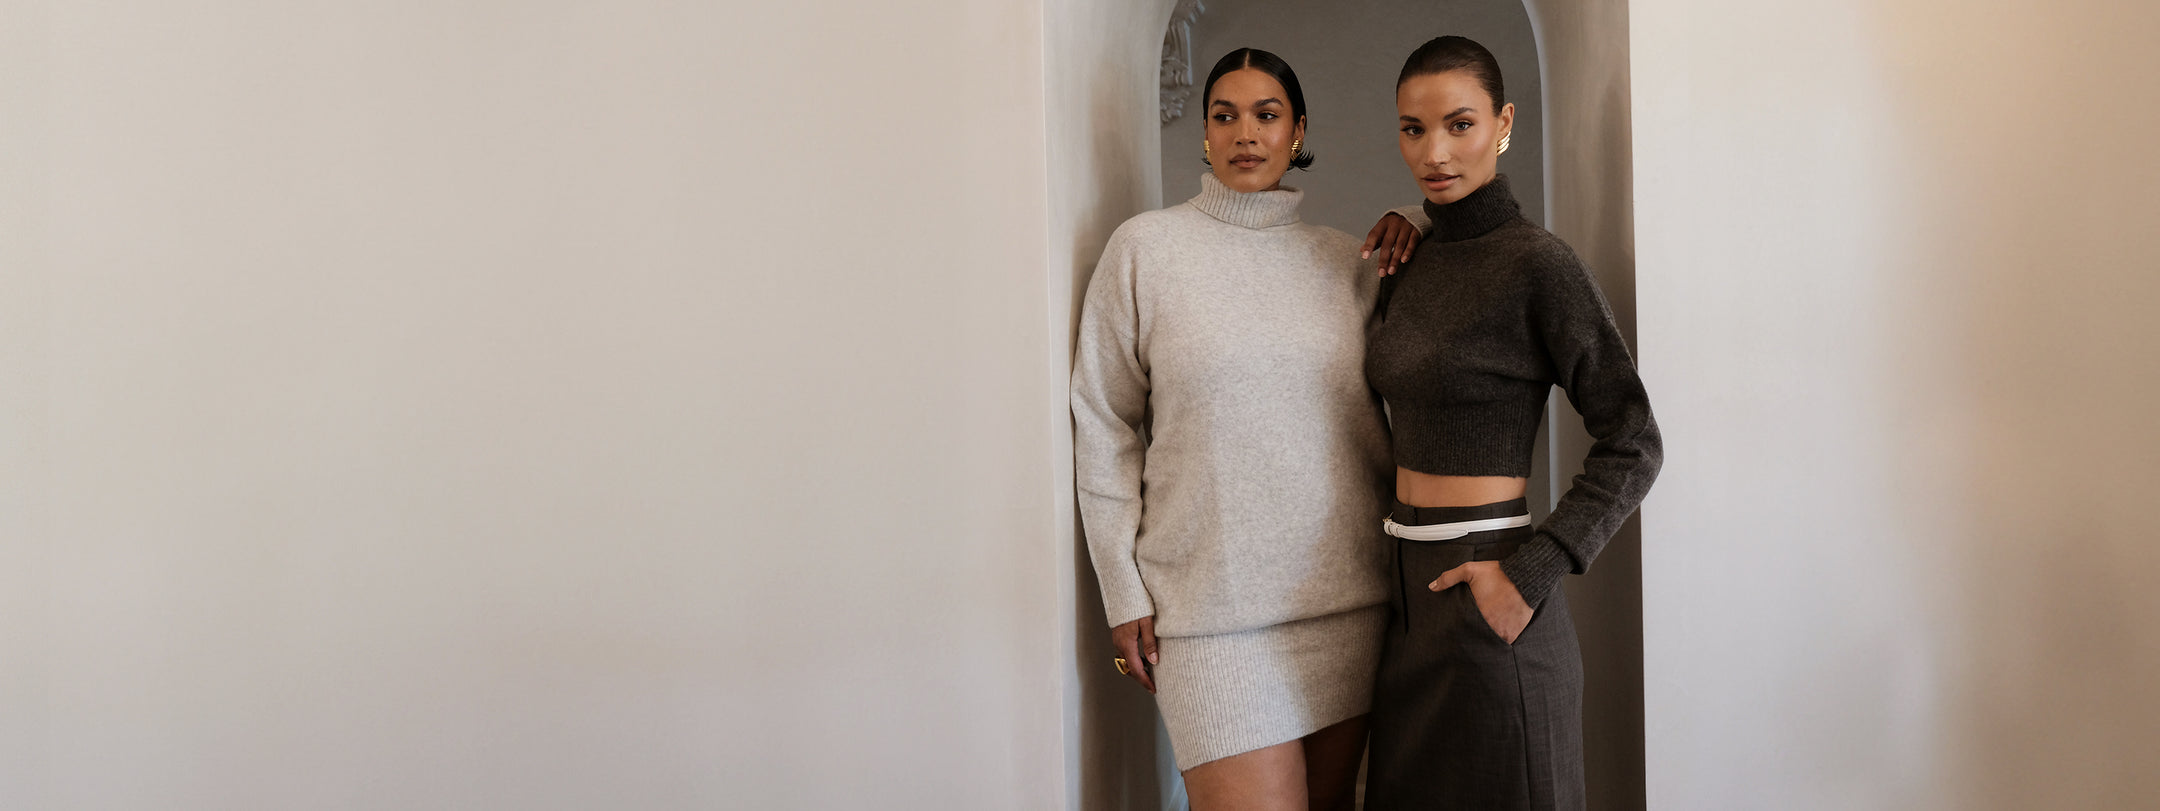 Image of women in grey knit dress and charcoal knit turtleneck.